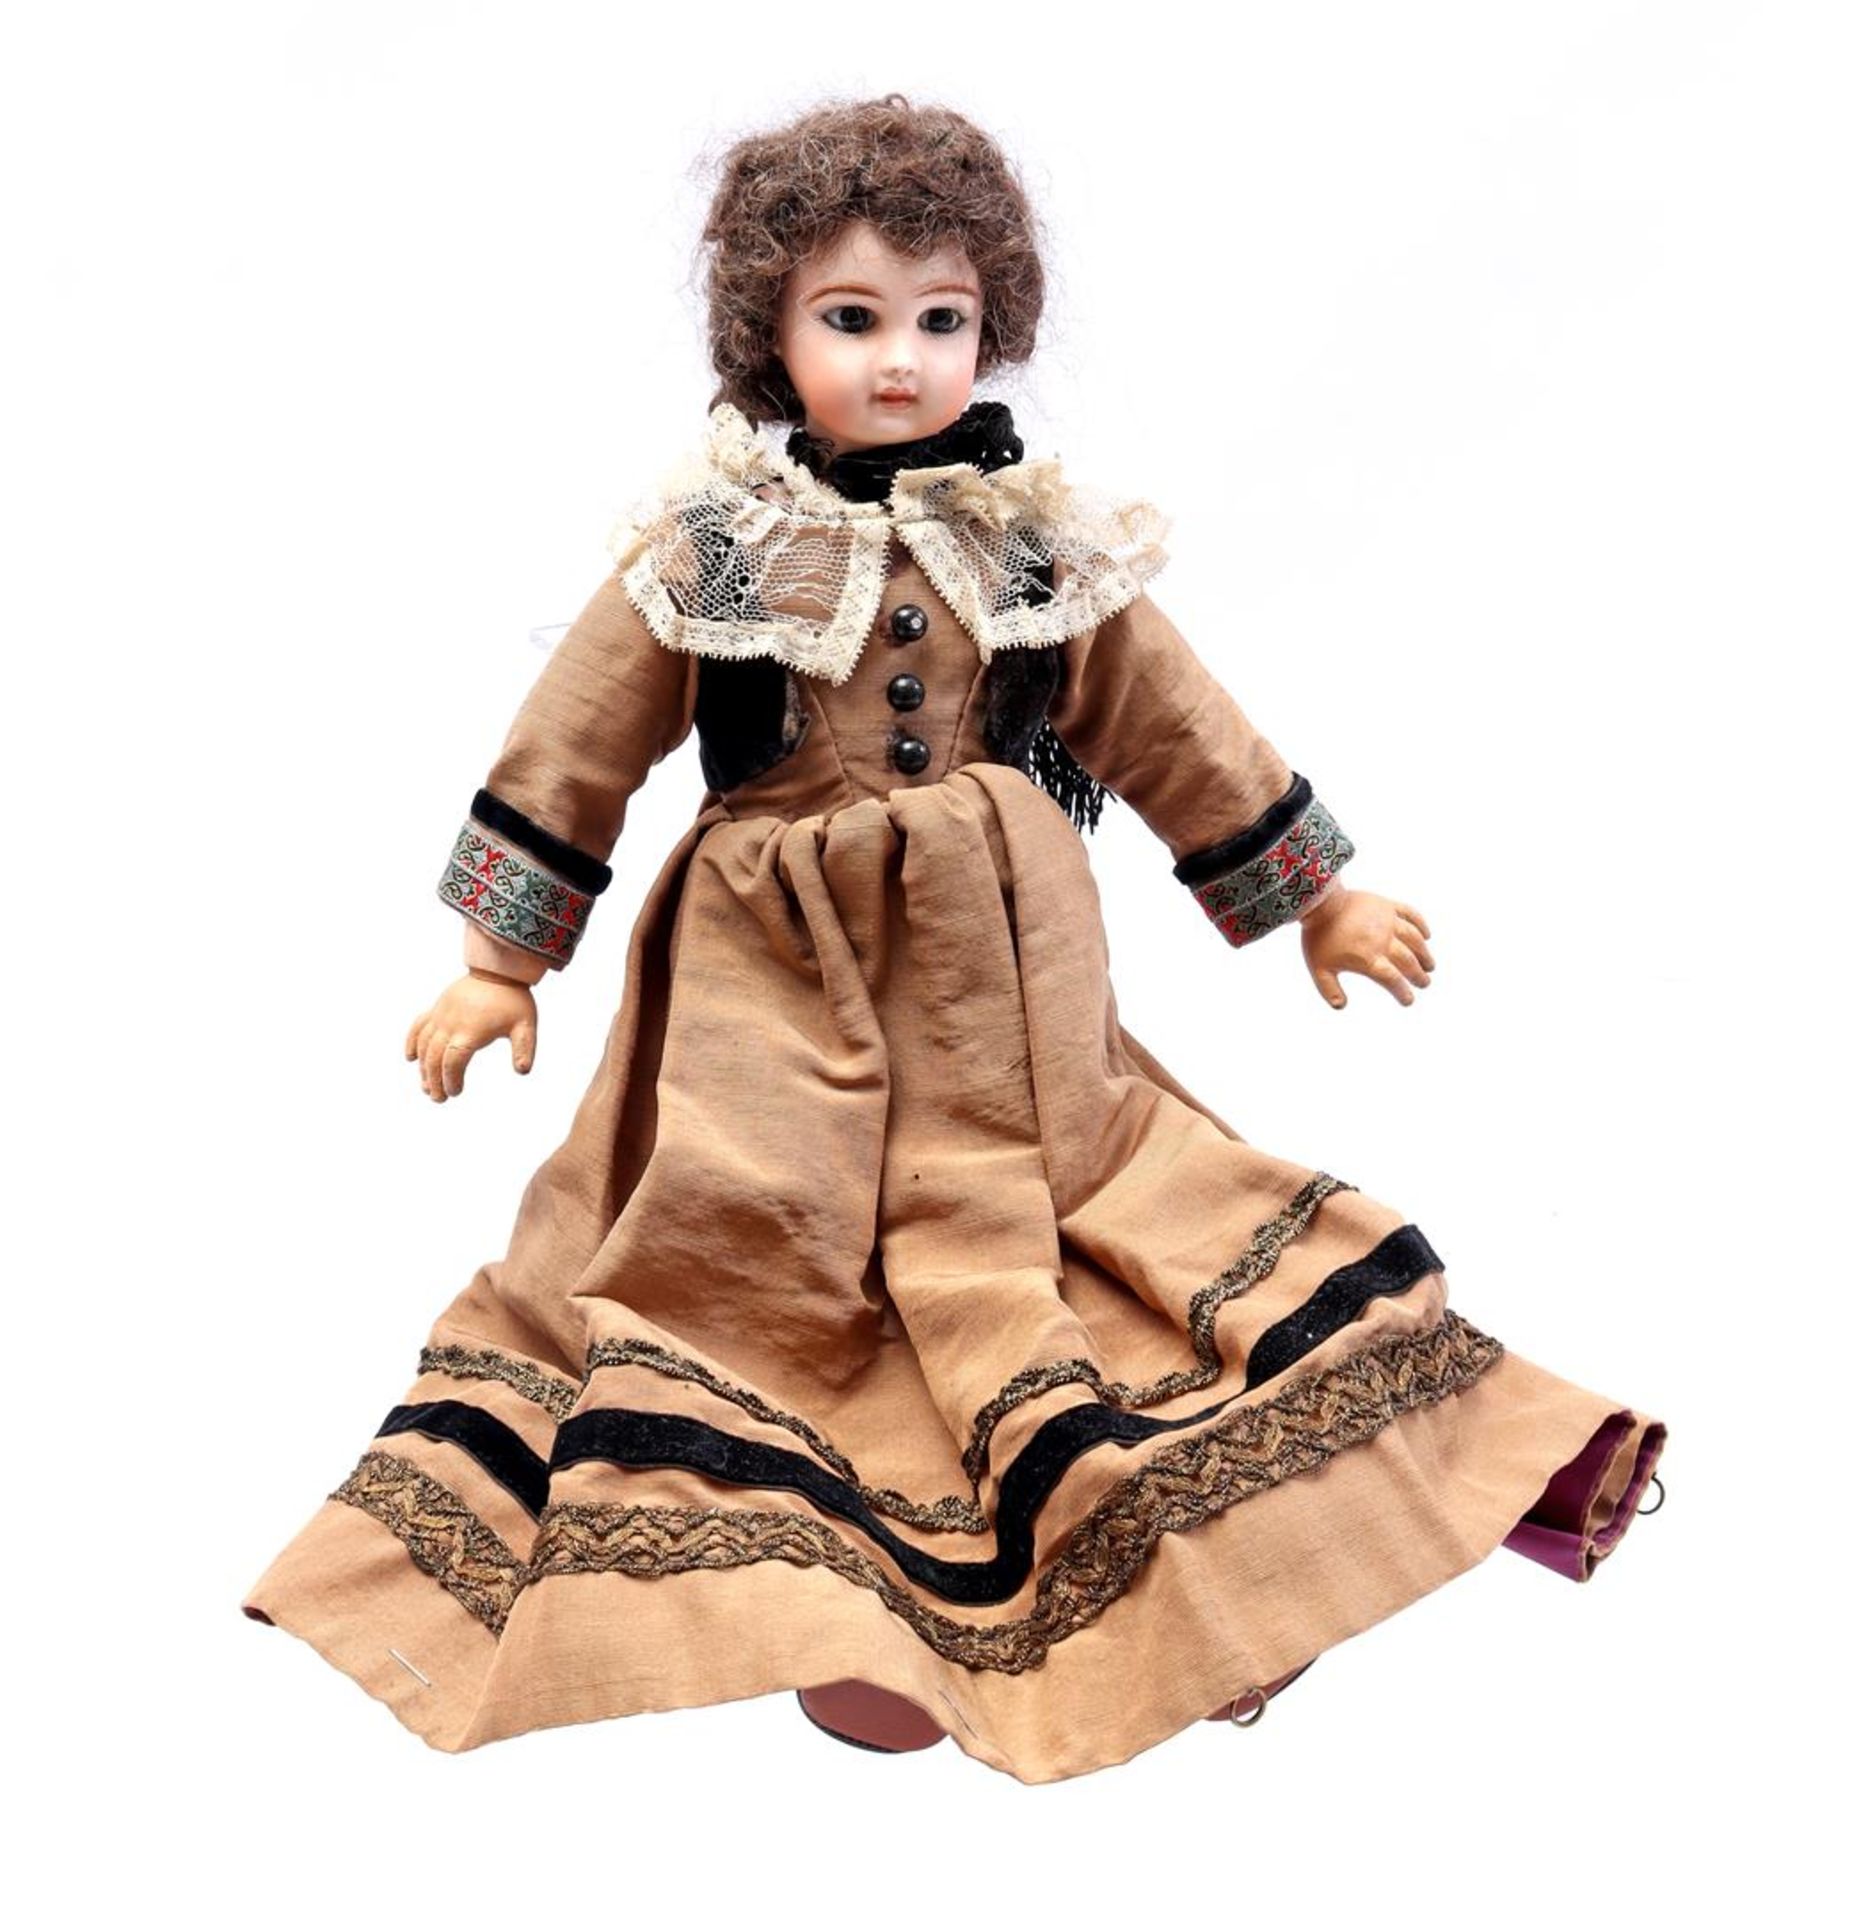 Porcelain doll with articulated body, France